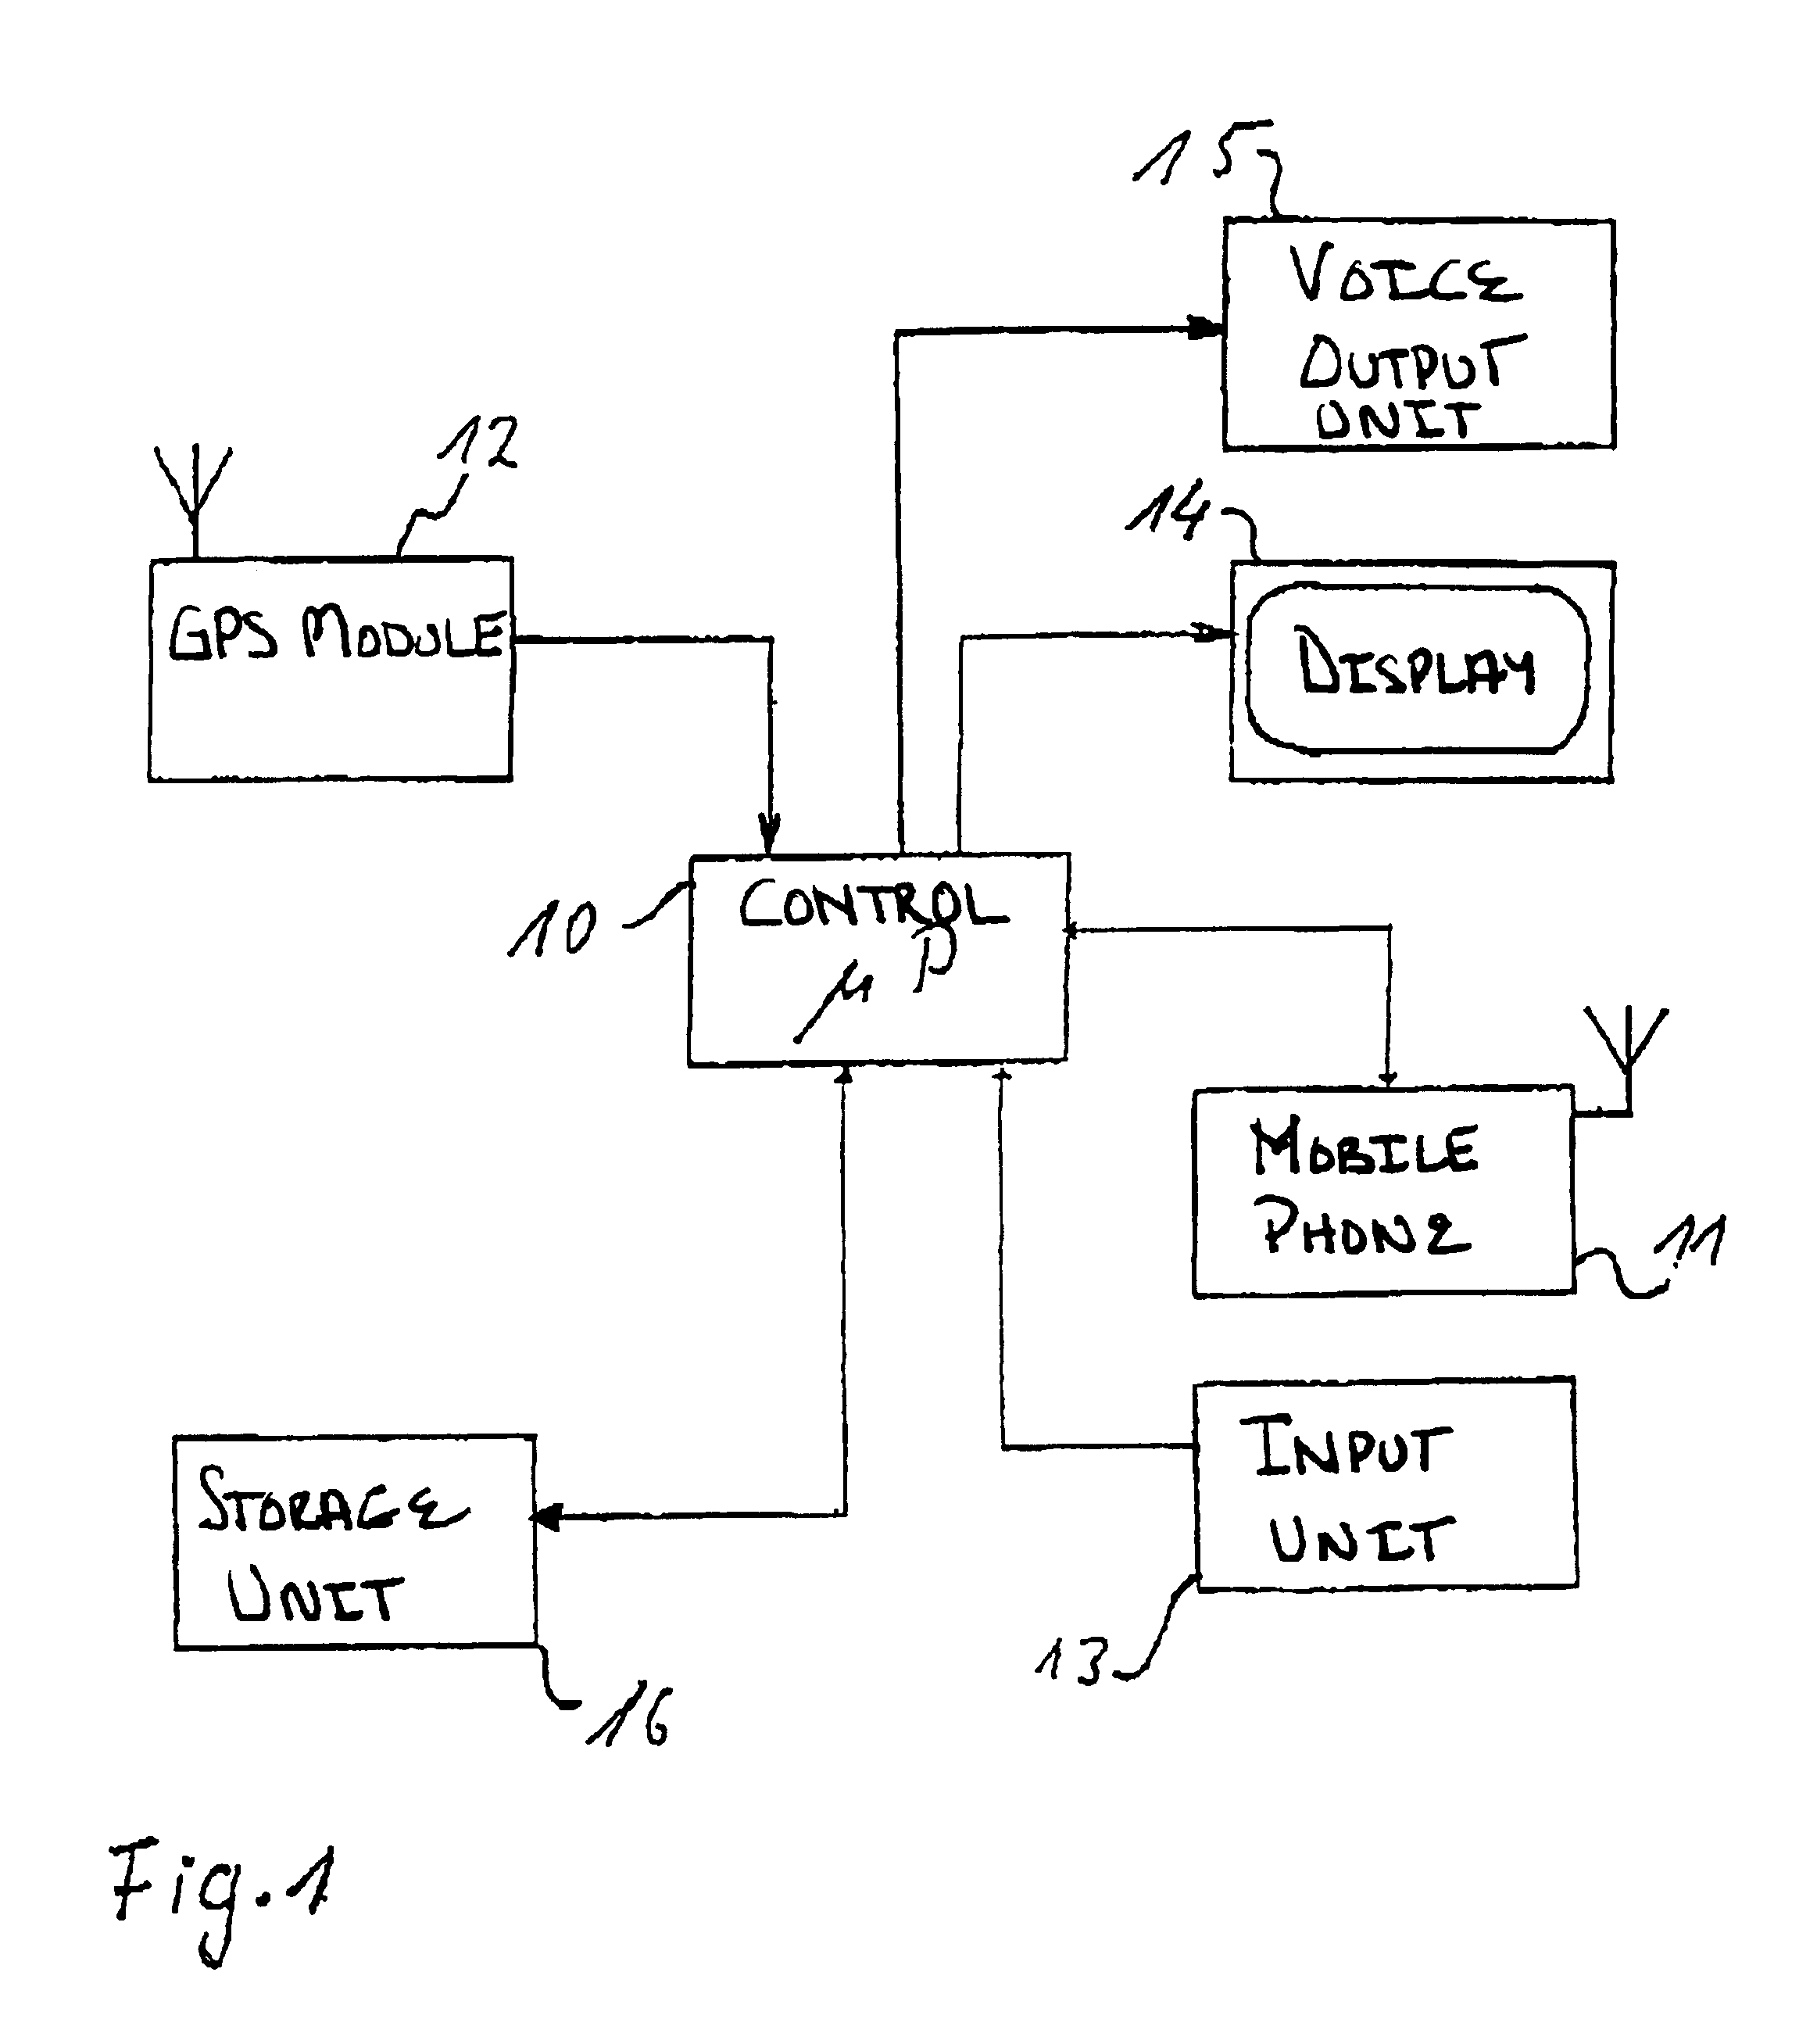 Method for outputting traffic information in a motor vehicle